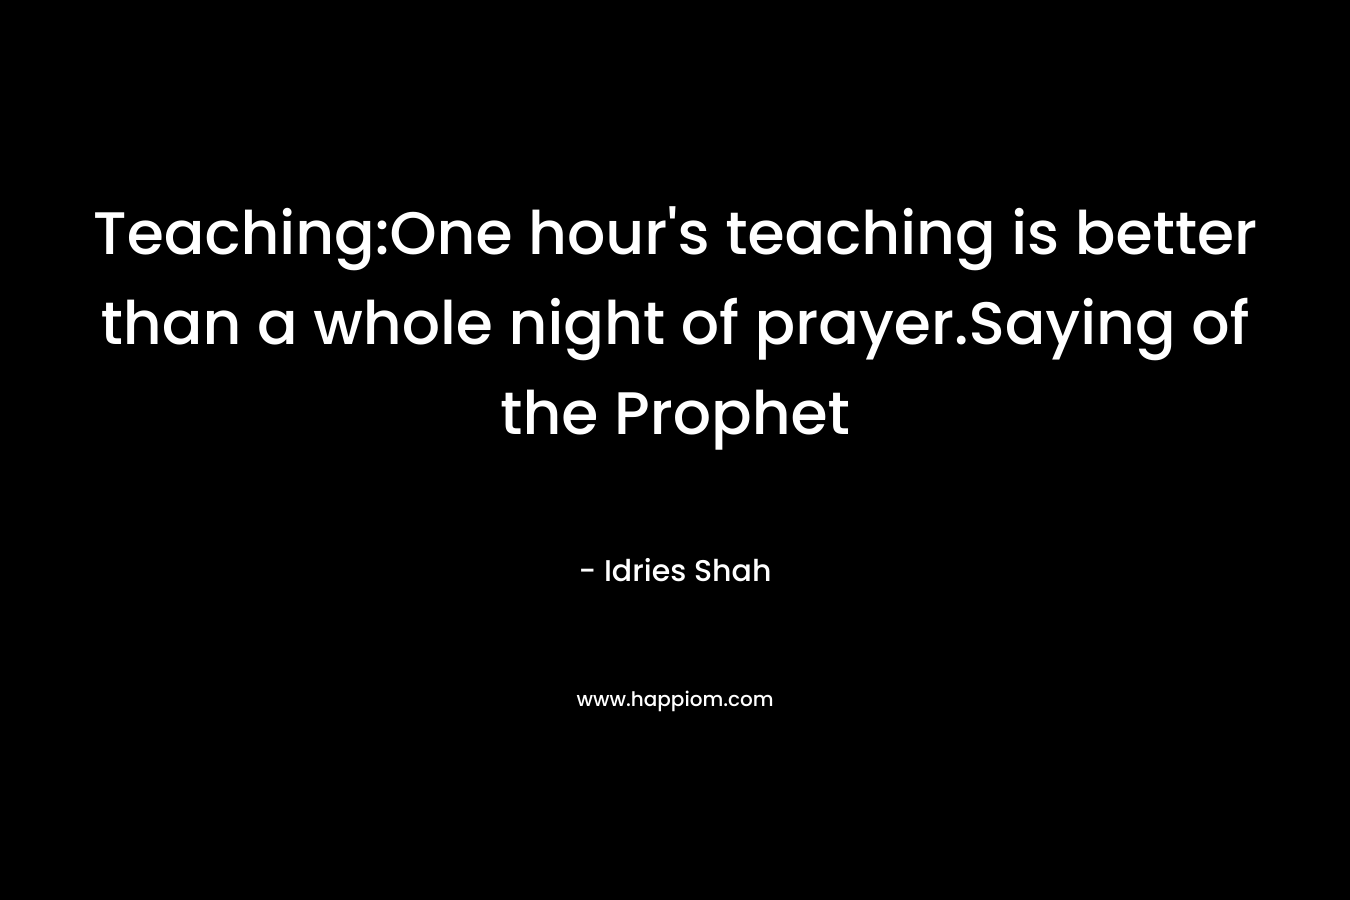 Teaching:One hour’s teaching is better than a whole night of prayer.Saying of the Prophet – Idries Shah